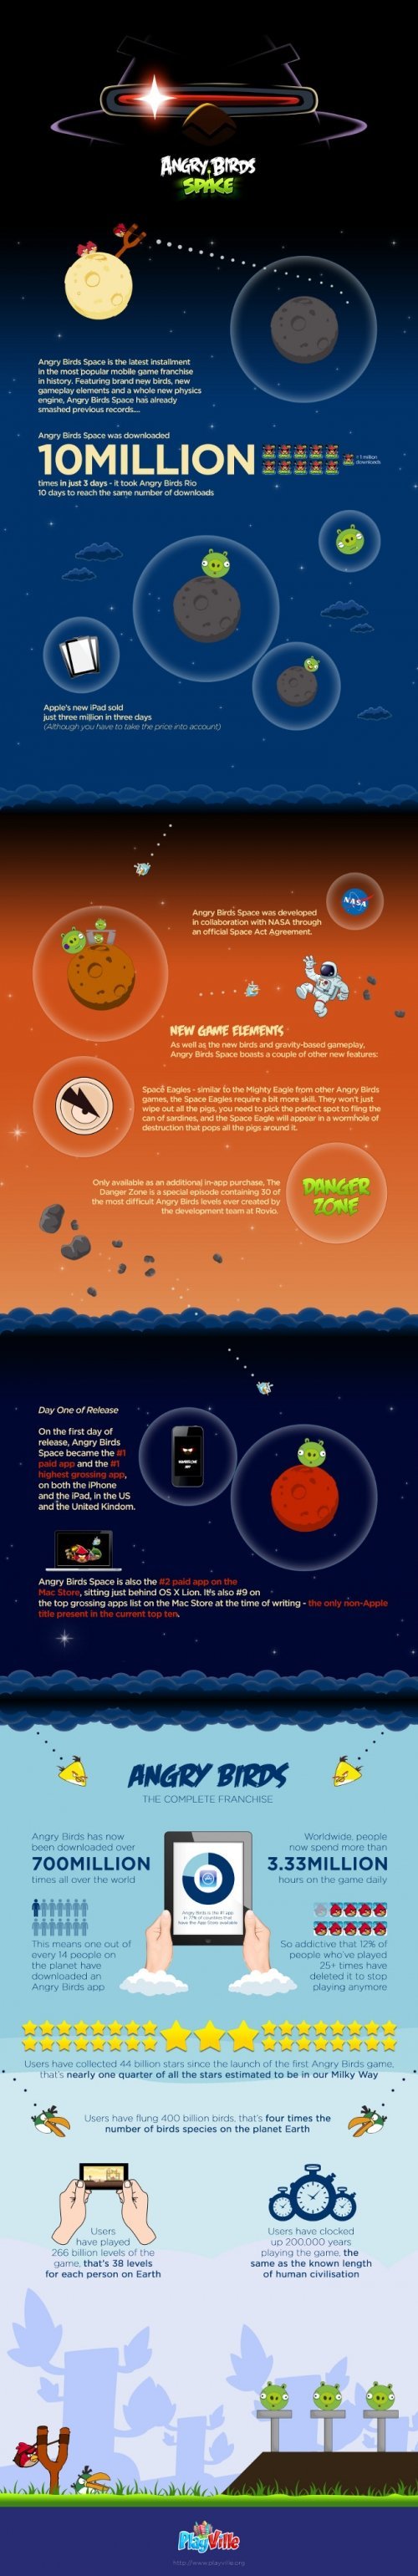 angry birds space vs angry birds infographic